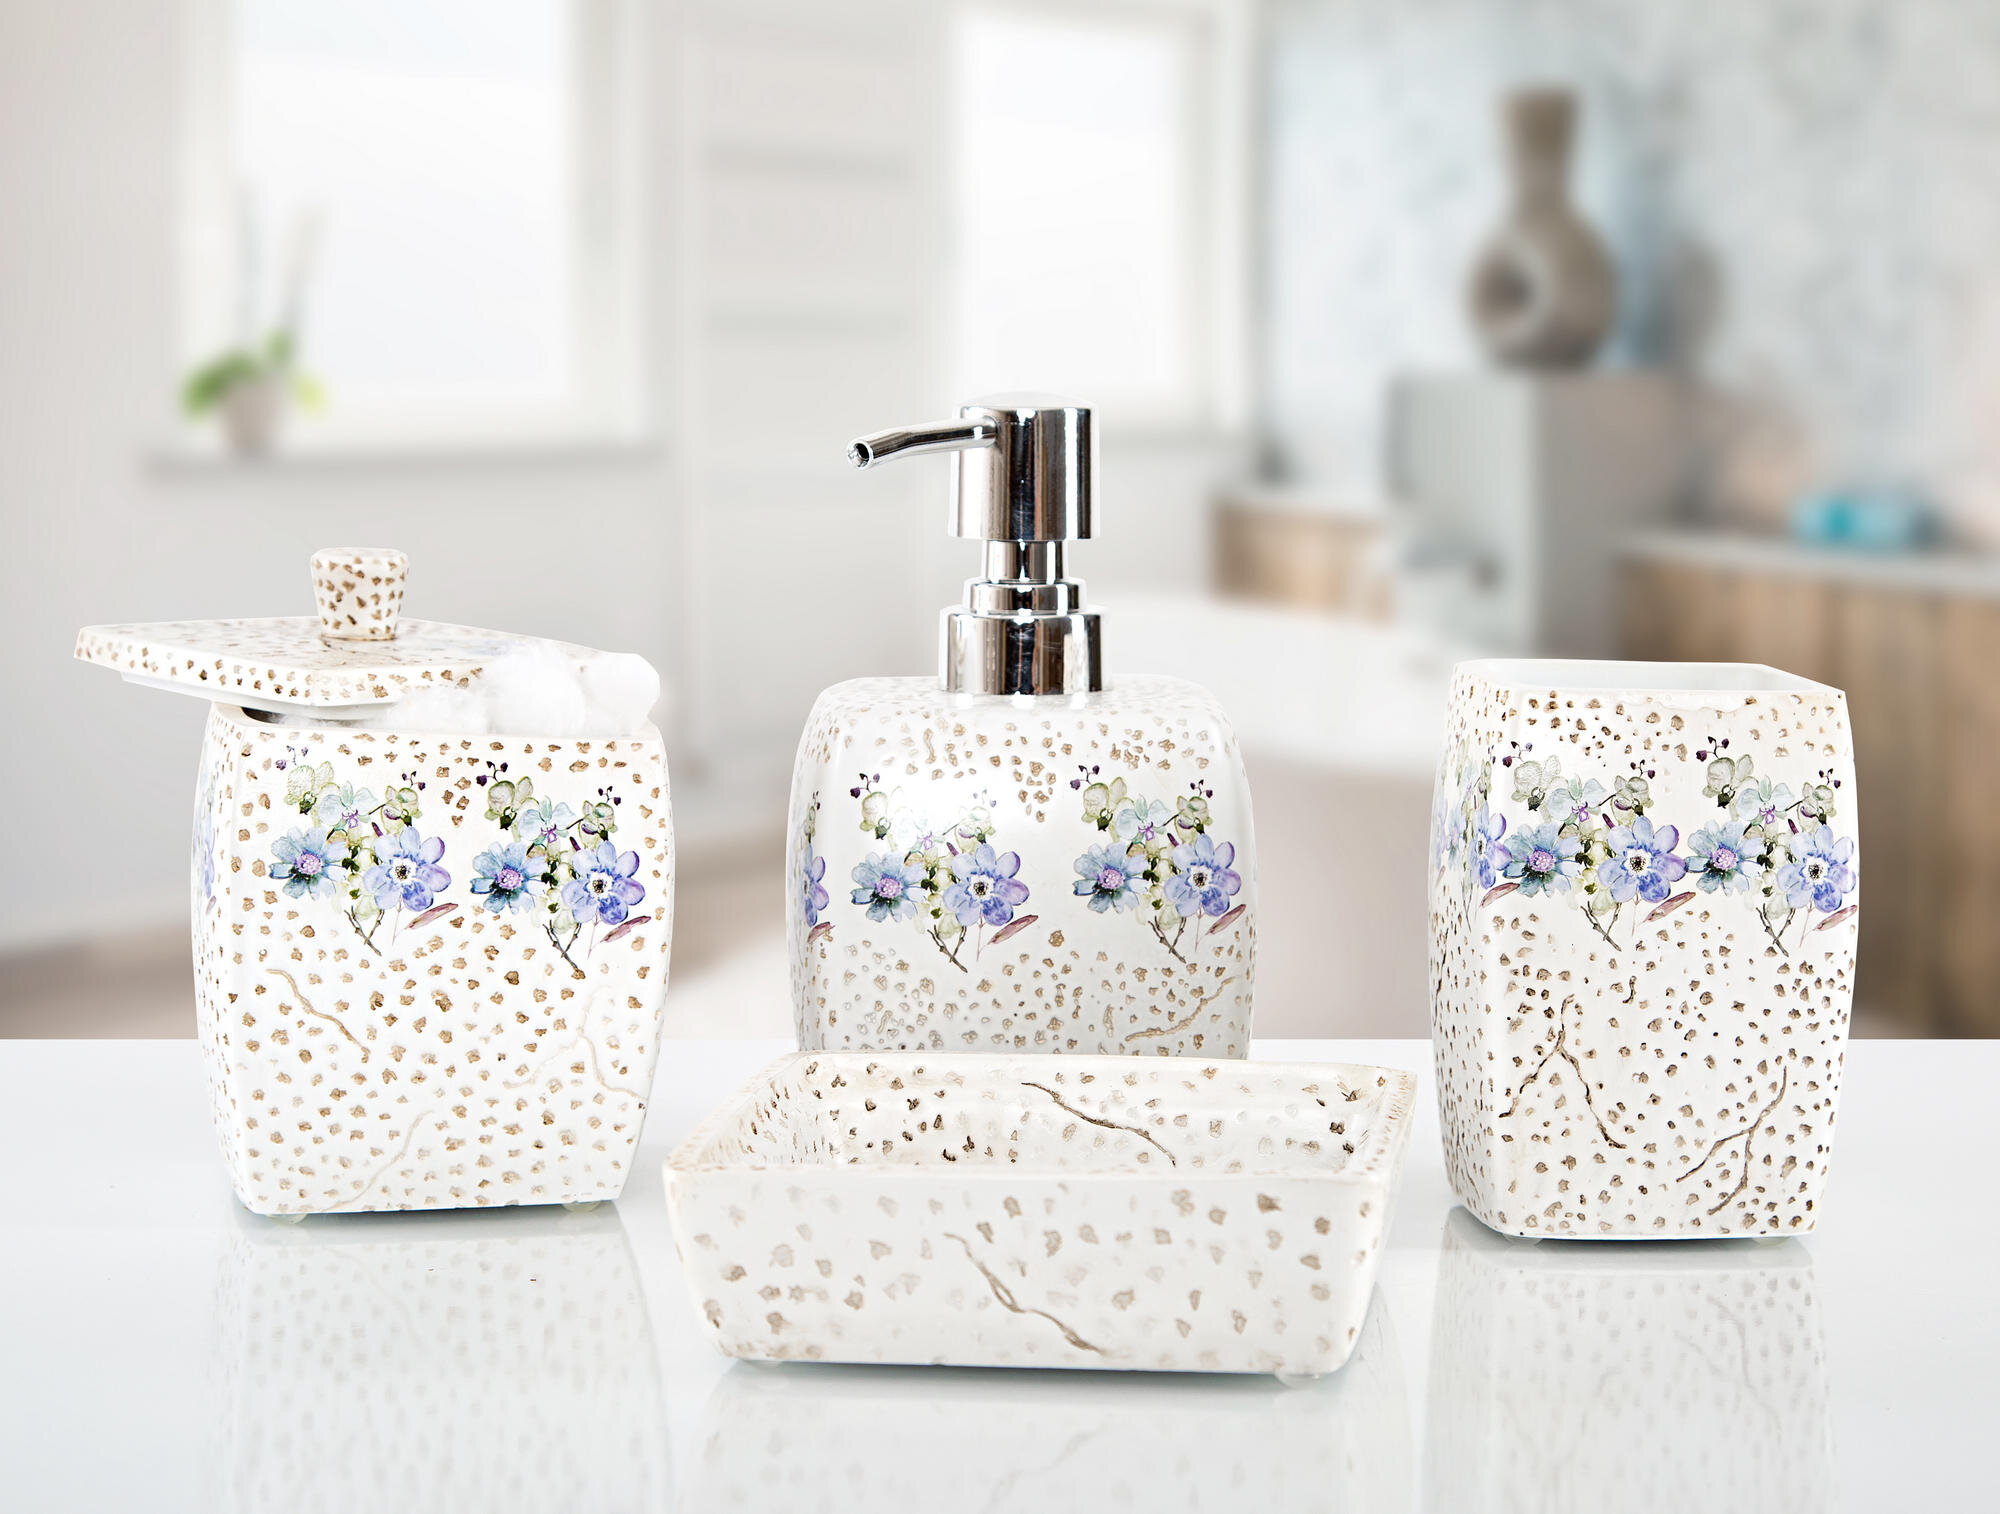 Creative Scents Bathroom Accessories Set 4-Piece Silver Mosaic Glass Luxury Bathroom Gift Set Includes Soap Dispenser Toothbrush Holder Tumbler